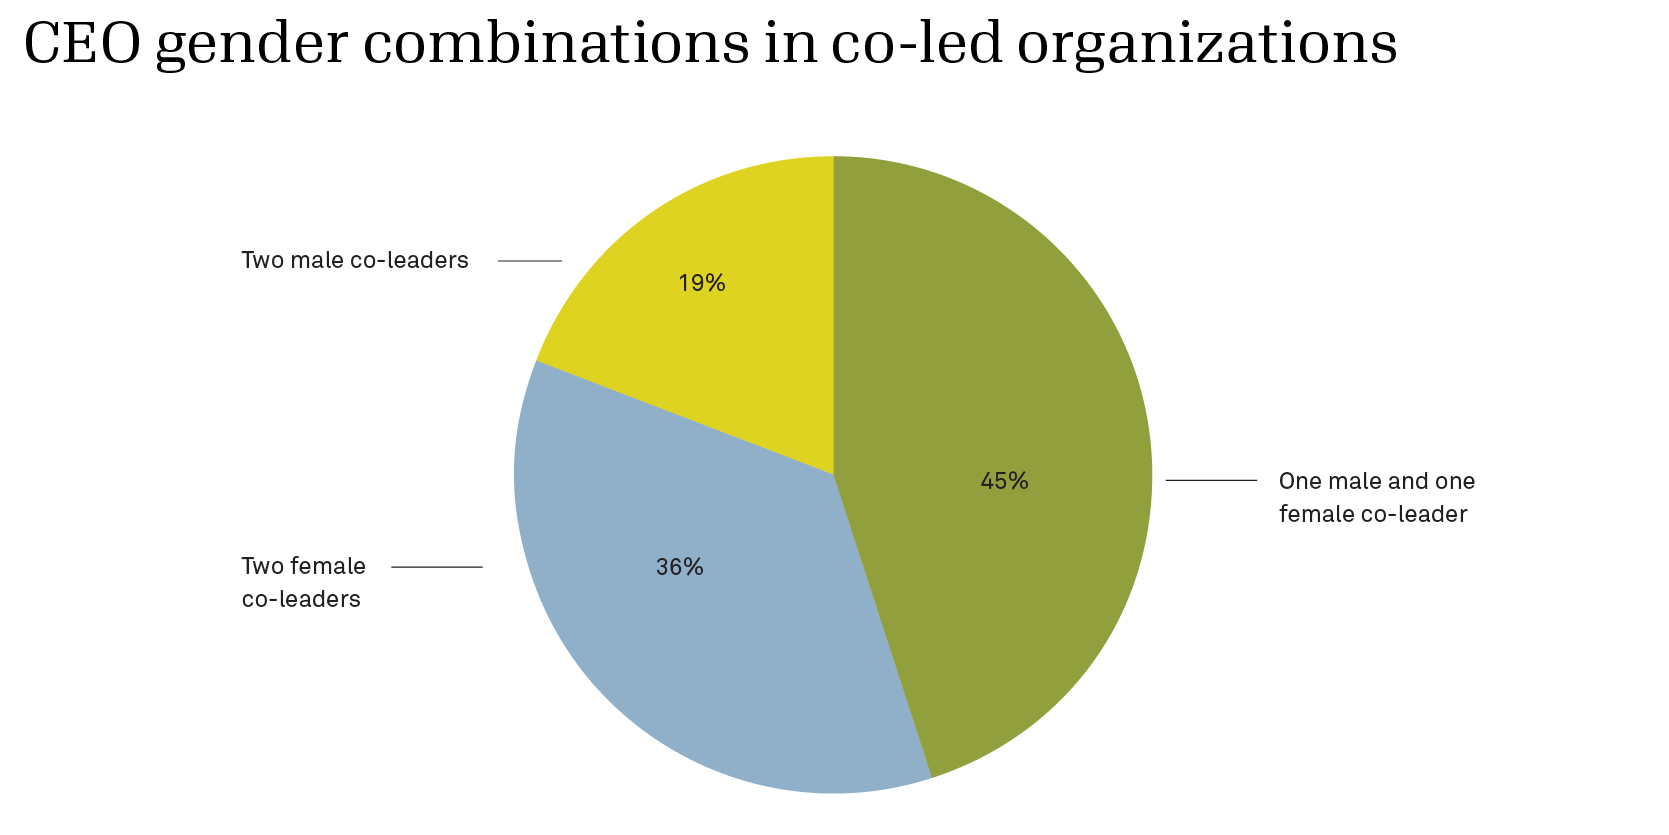 Pie chart of CEO gender combinations in co-led organizations. 19% have two male co-leaders, 36% have two female co-leaders, and 45% have one male and one female co-leader. 